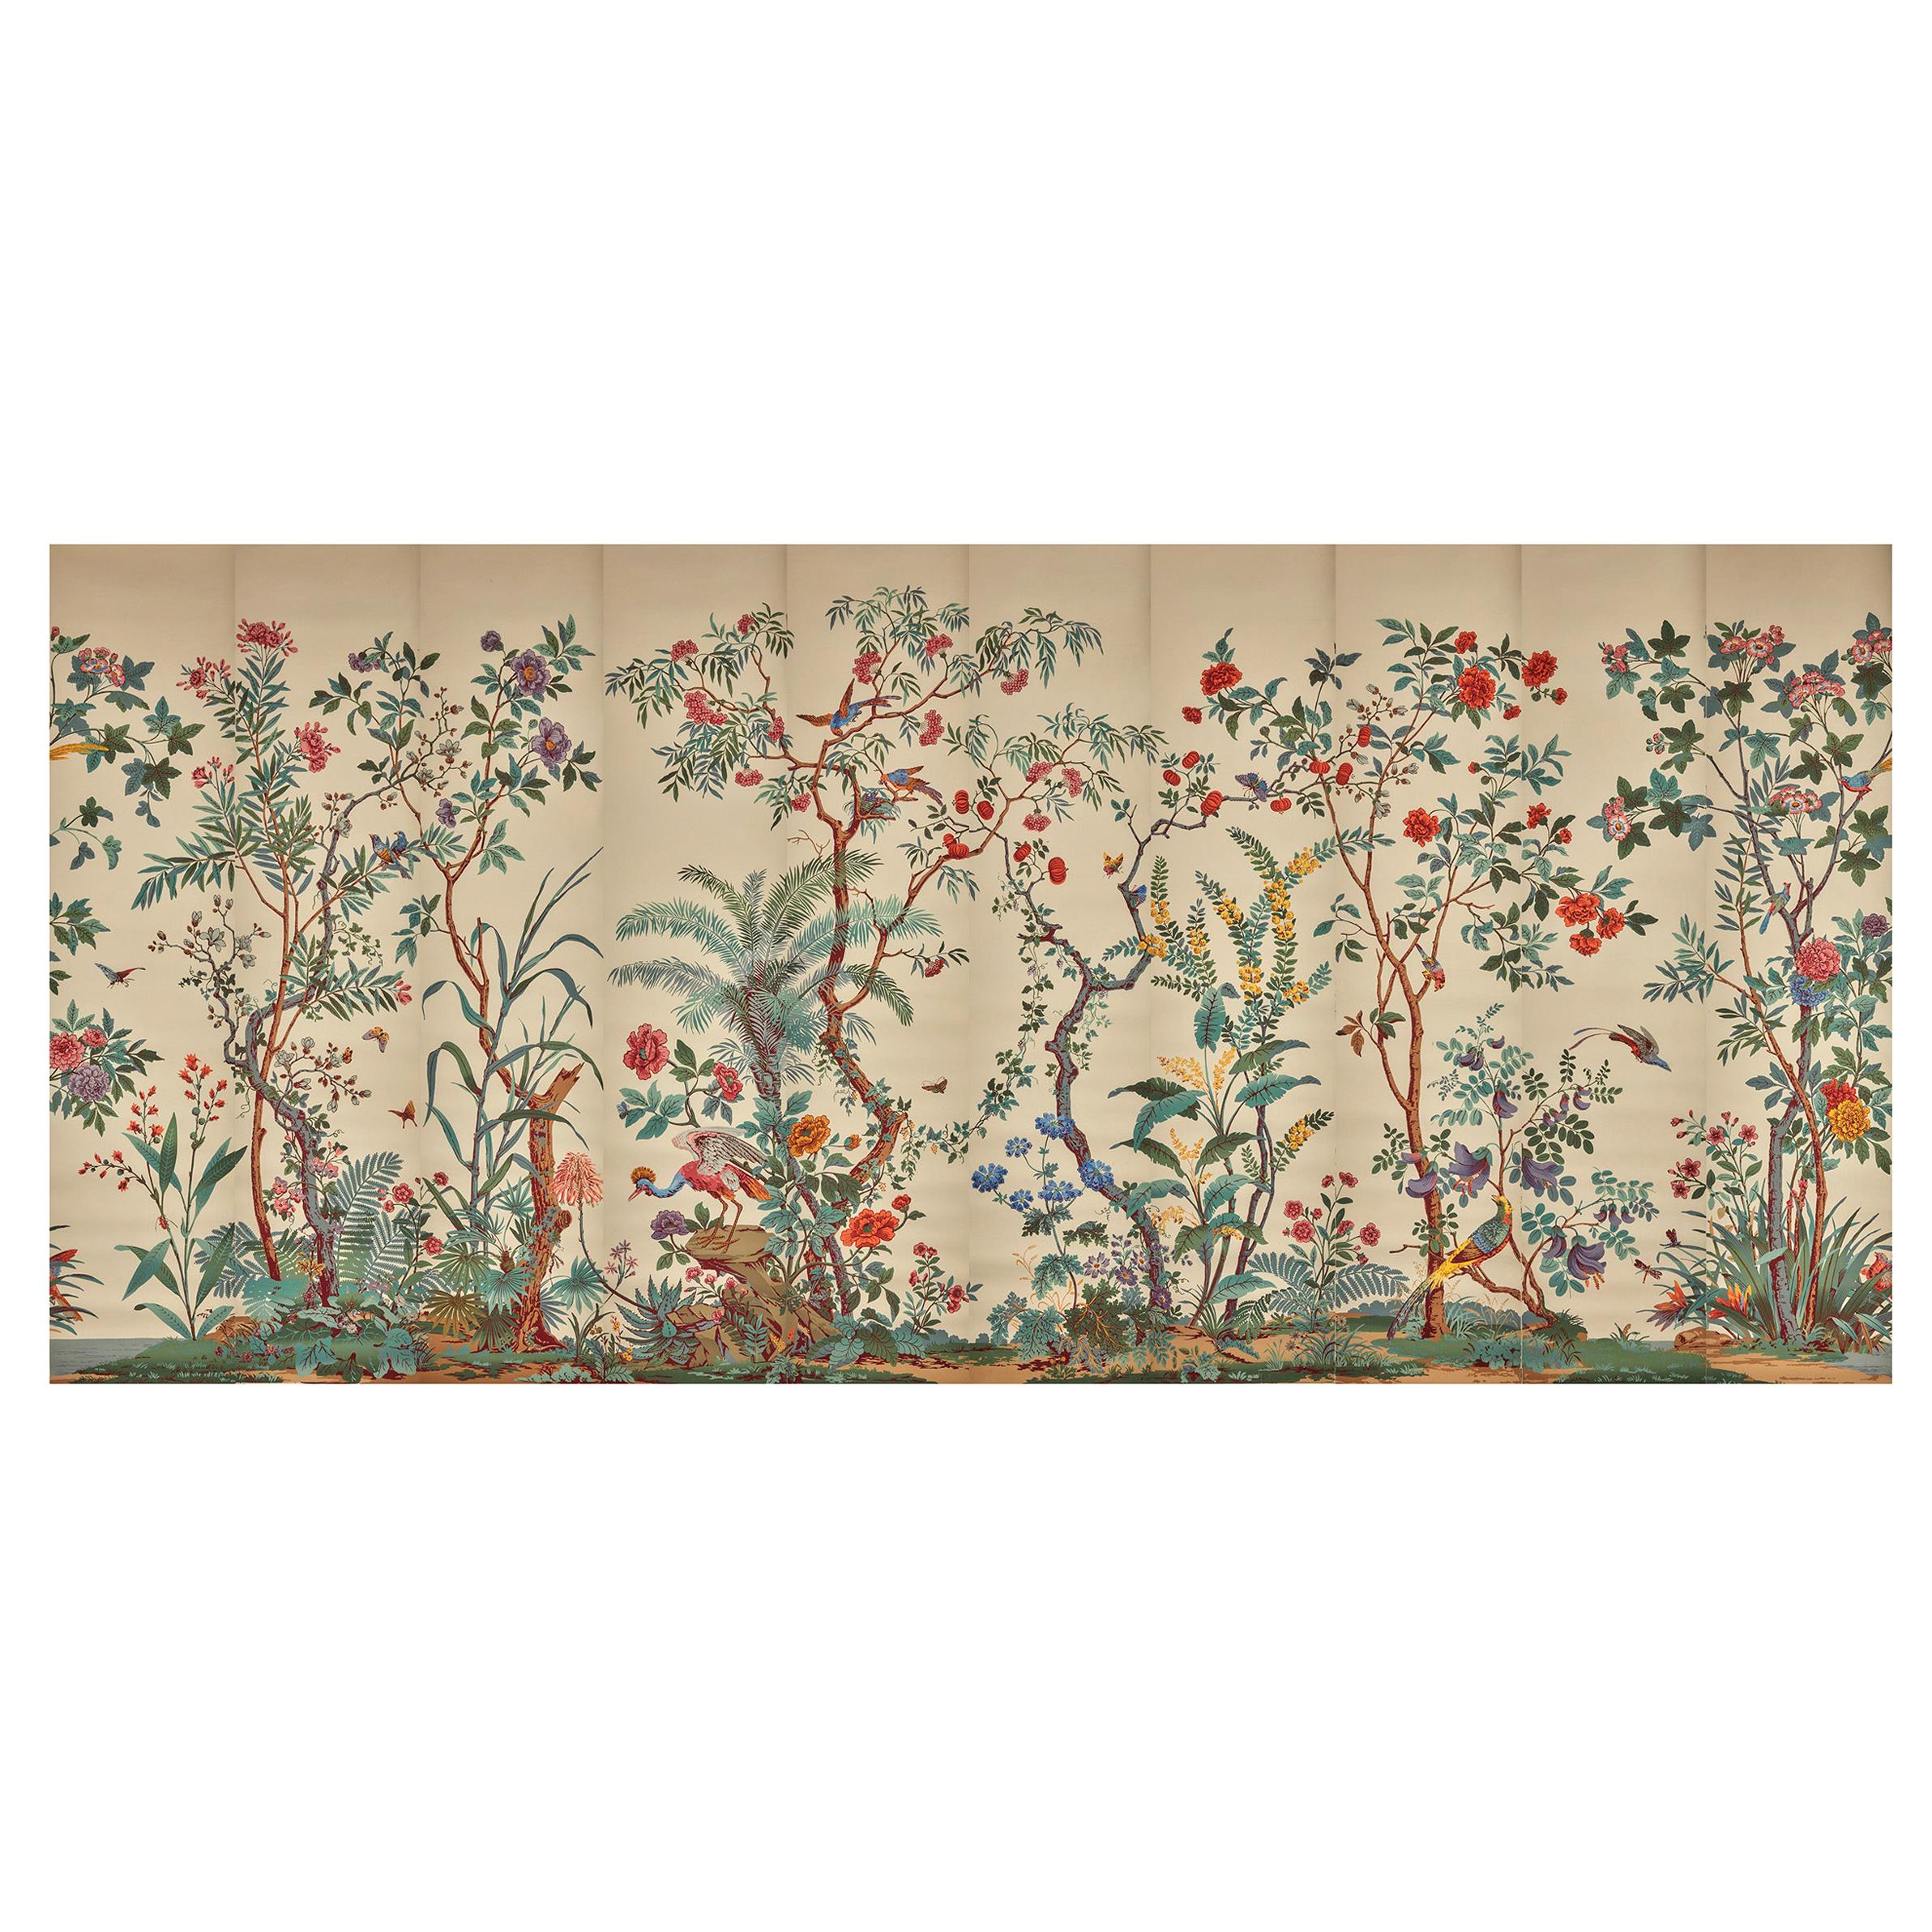 Zuber, 'Decor Chinois' Hand Wood Block Scenic Wall Paper Red Line Color Way For Sale